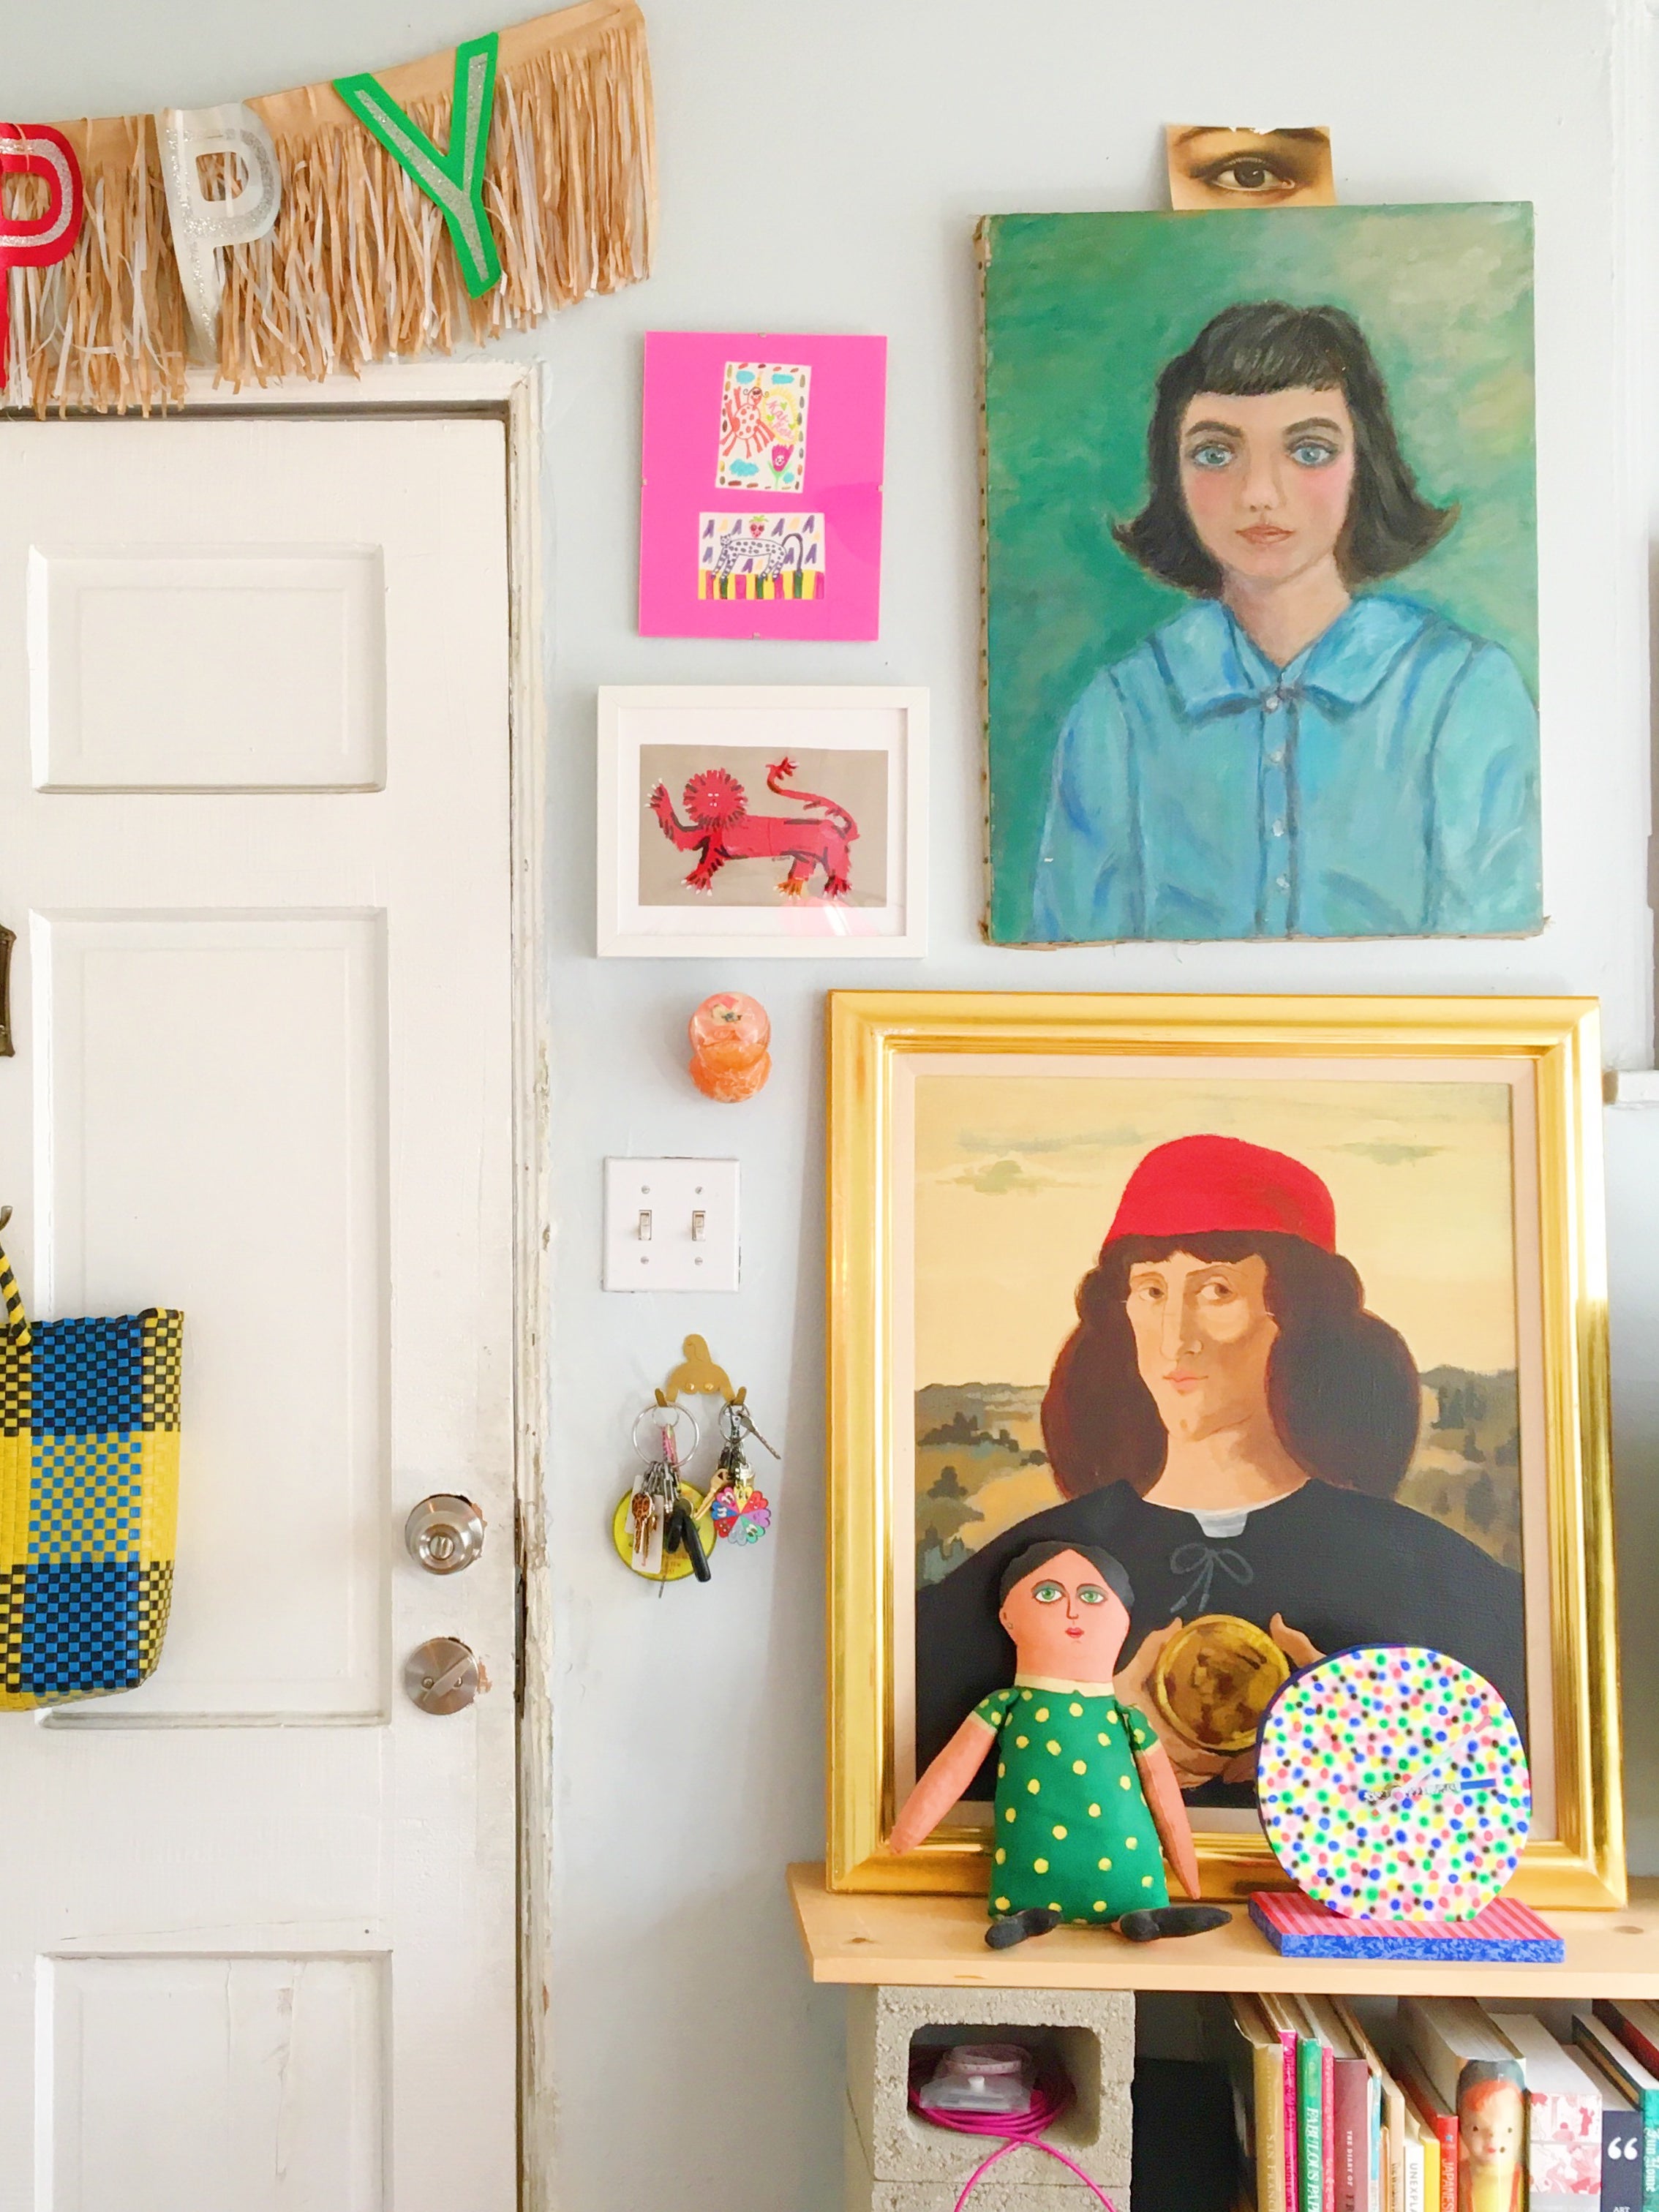 How Artist Isa Beniston Finds Creativity at Home